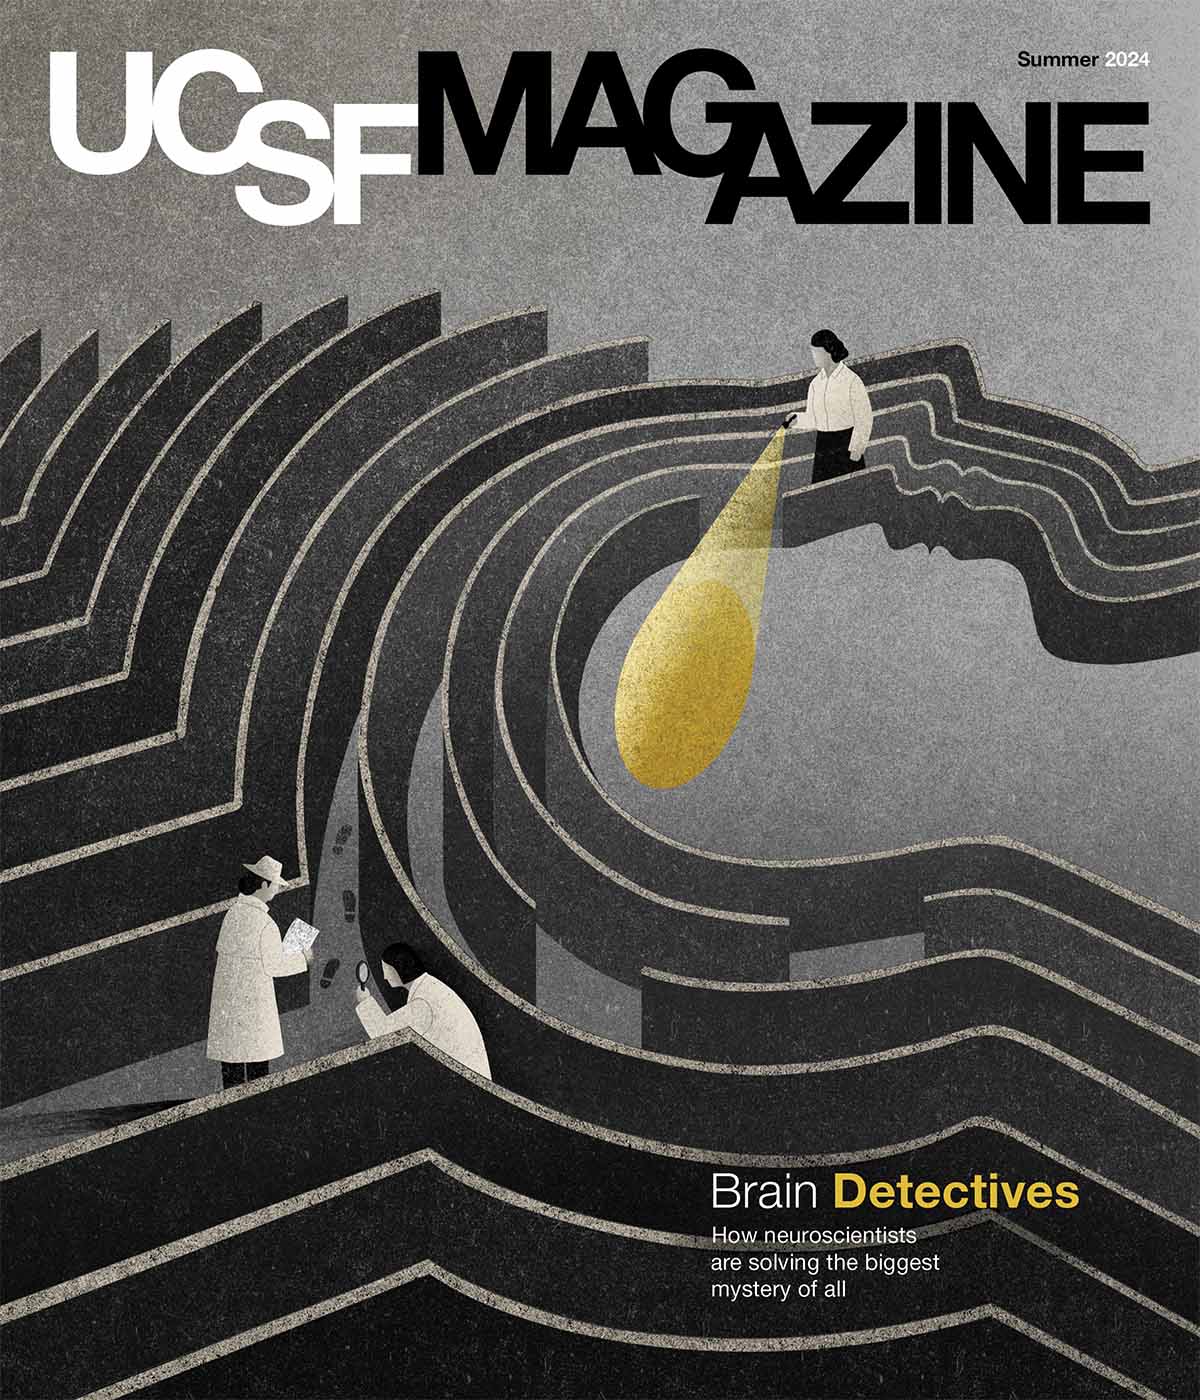 Cover of UCSF Magazine: top reads “UCSF Magazine, Summer 2024”. Text below reads “Brain Detectives: How neuroscientists are solving the biggest mystery of all” Illustration shows Illustration of a dark maze; the inner circle is the shape of a profile of a human head. People walk around the maze in white coats investigating. One figure wears a fedora and see footprints. Another figure shines a flashlight where the brain would appear on the head silhouette